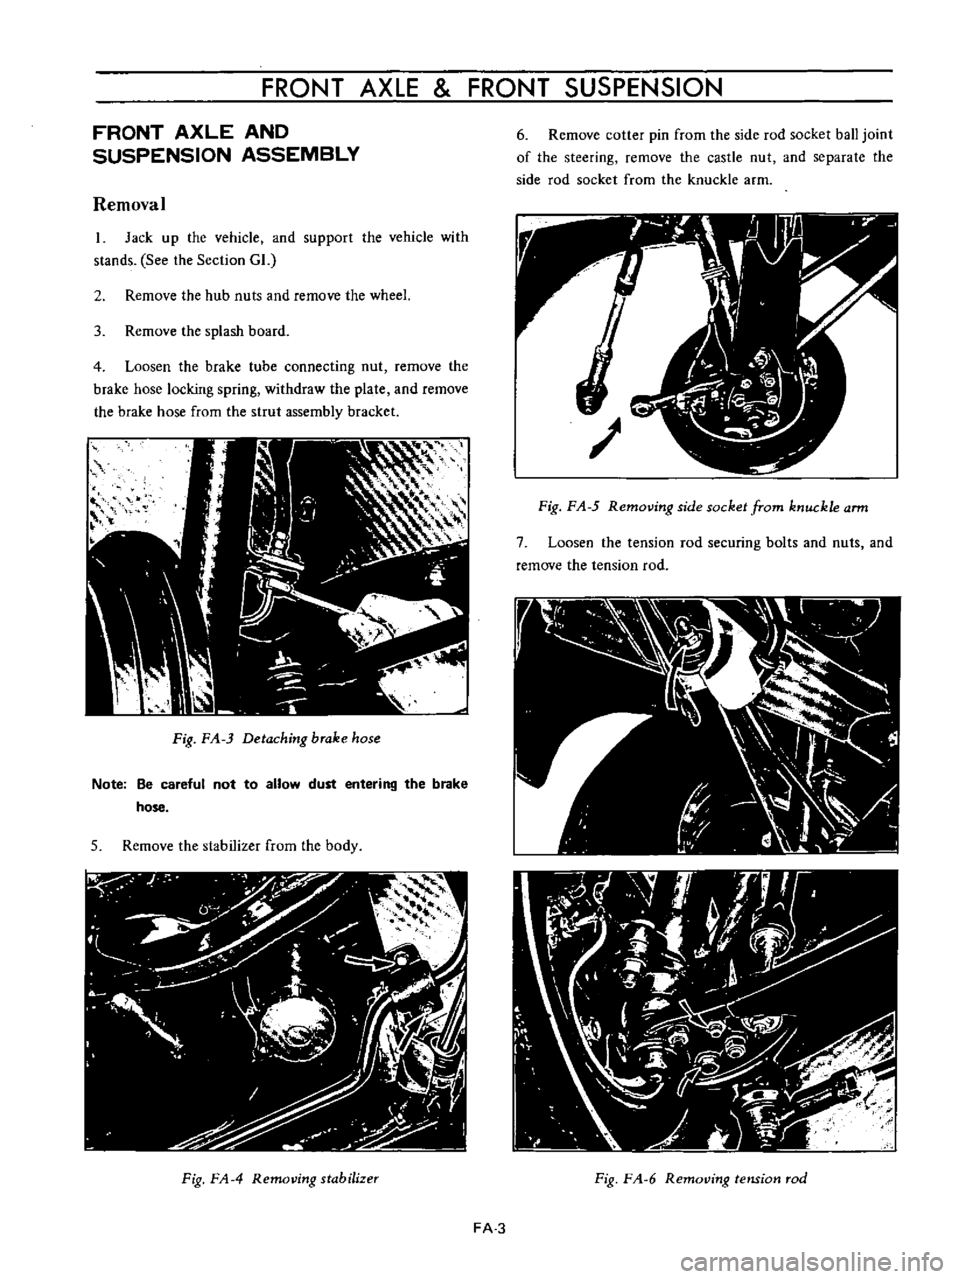 DATSUN B110 1973  Service Repair Manual 
FRONT 
AXLE 
FRONT 
SUSPENSION

FRONT 
AXLE 
AND

SUSPENSION 
ASSEMBLY

Removal

1 
Jack

up 
the

vehicle 
and

support 
the 
vehicle 
with

stands 
See 
the 
Section 
GL

2 
Remove 
the

hub 
nuts 